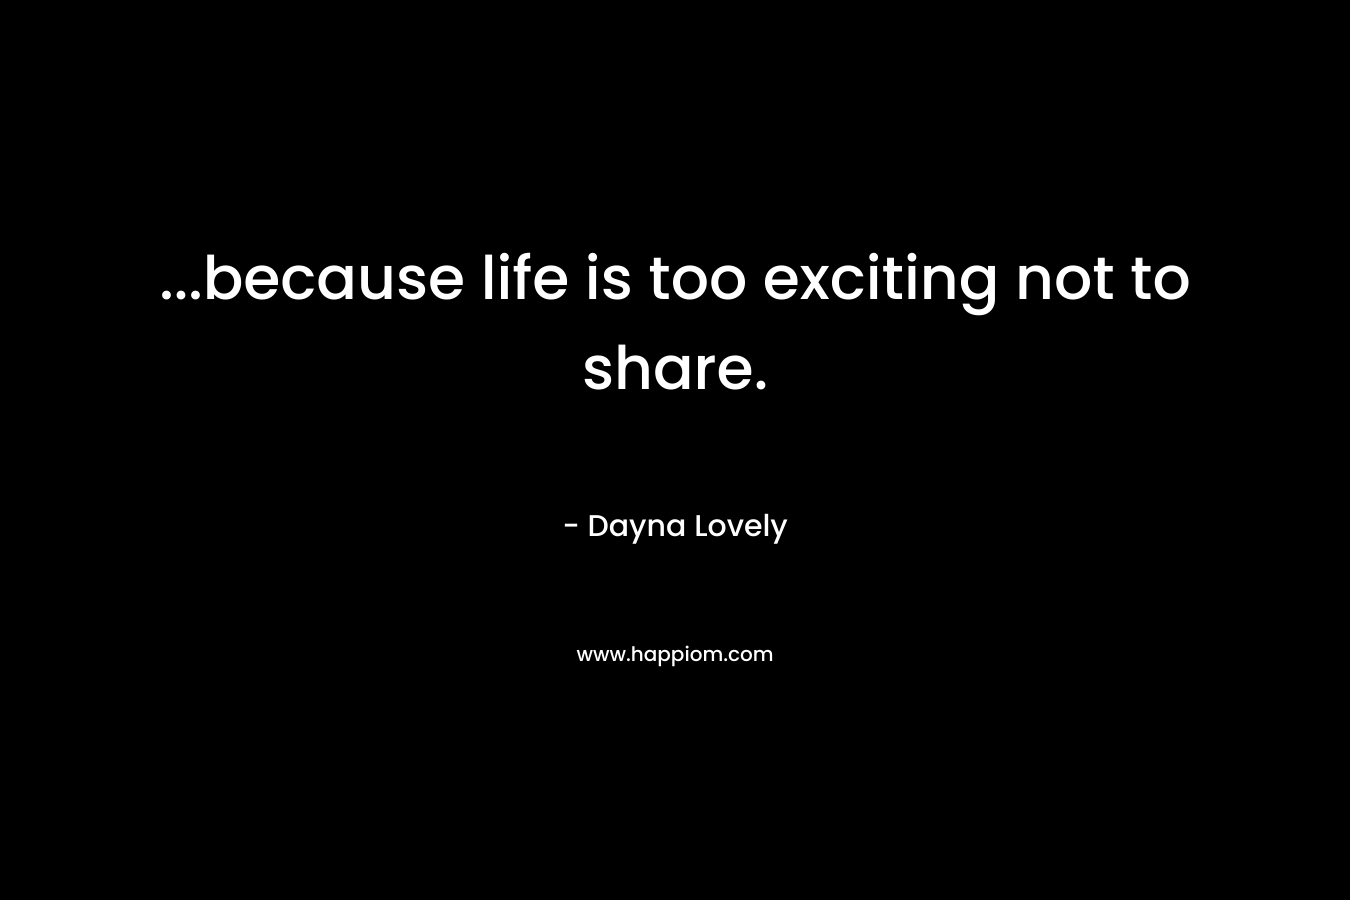 …because life is too exciting not to share. – Dayna Lovely